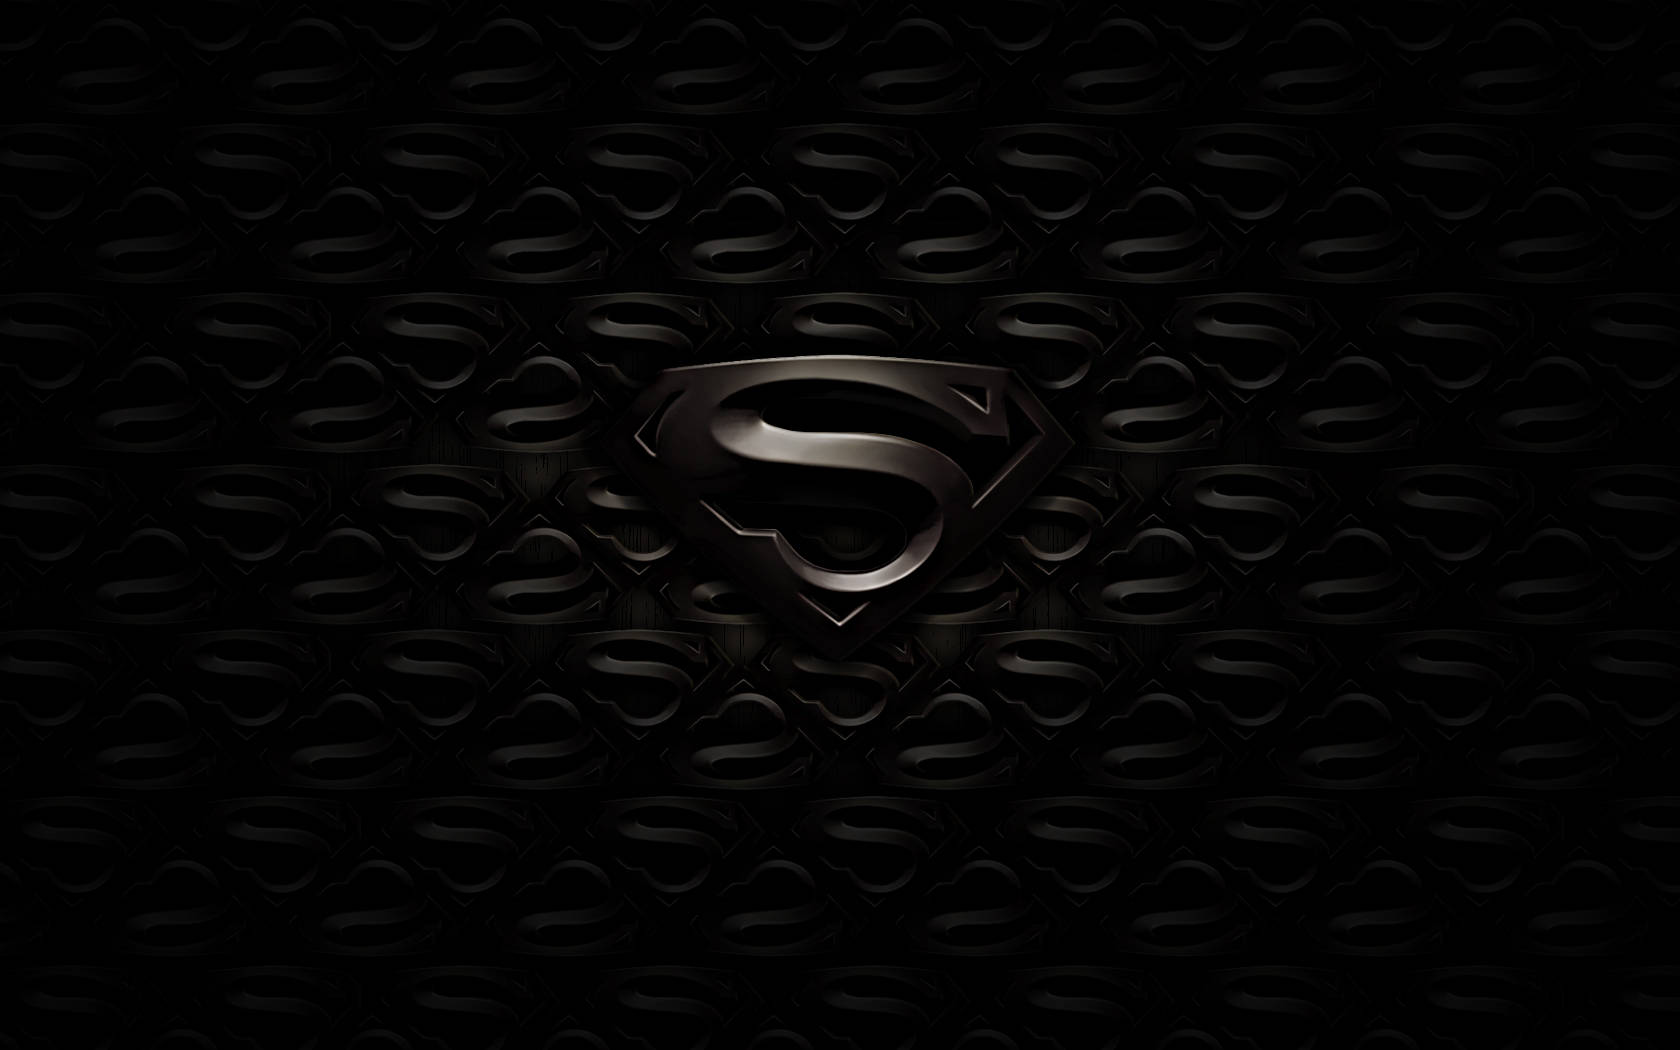 Superman with black suit Wallpaper 4k Ultra HD ID:5945